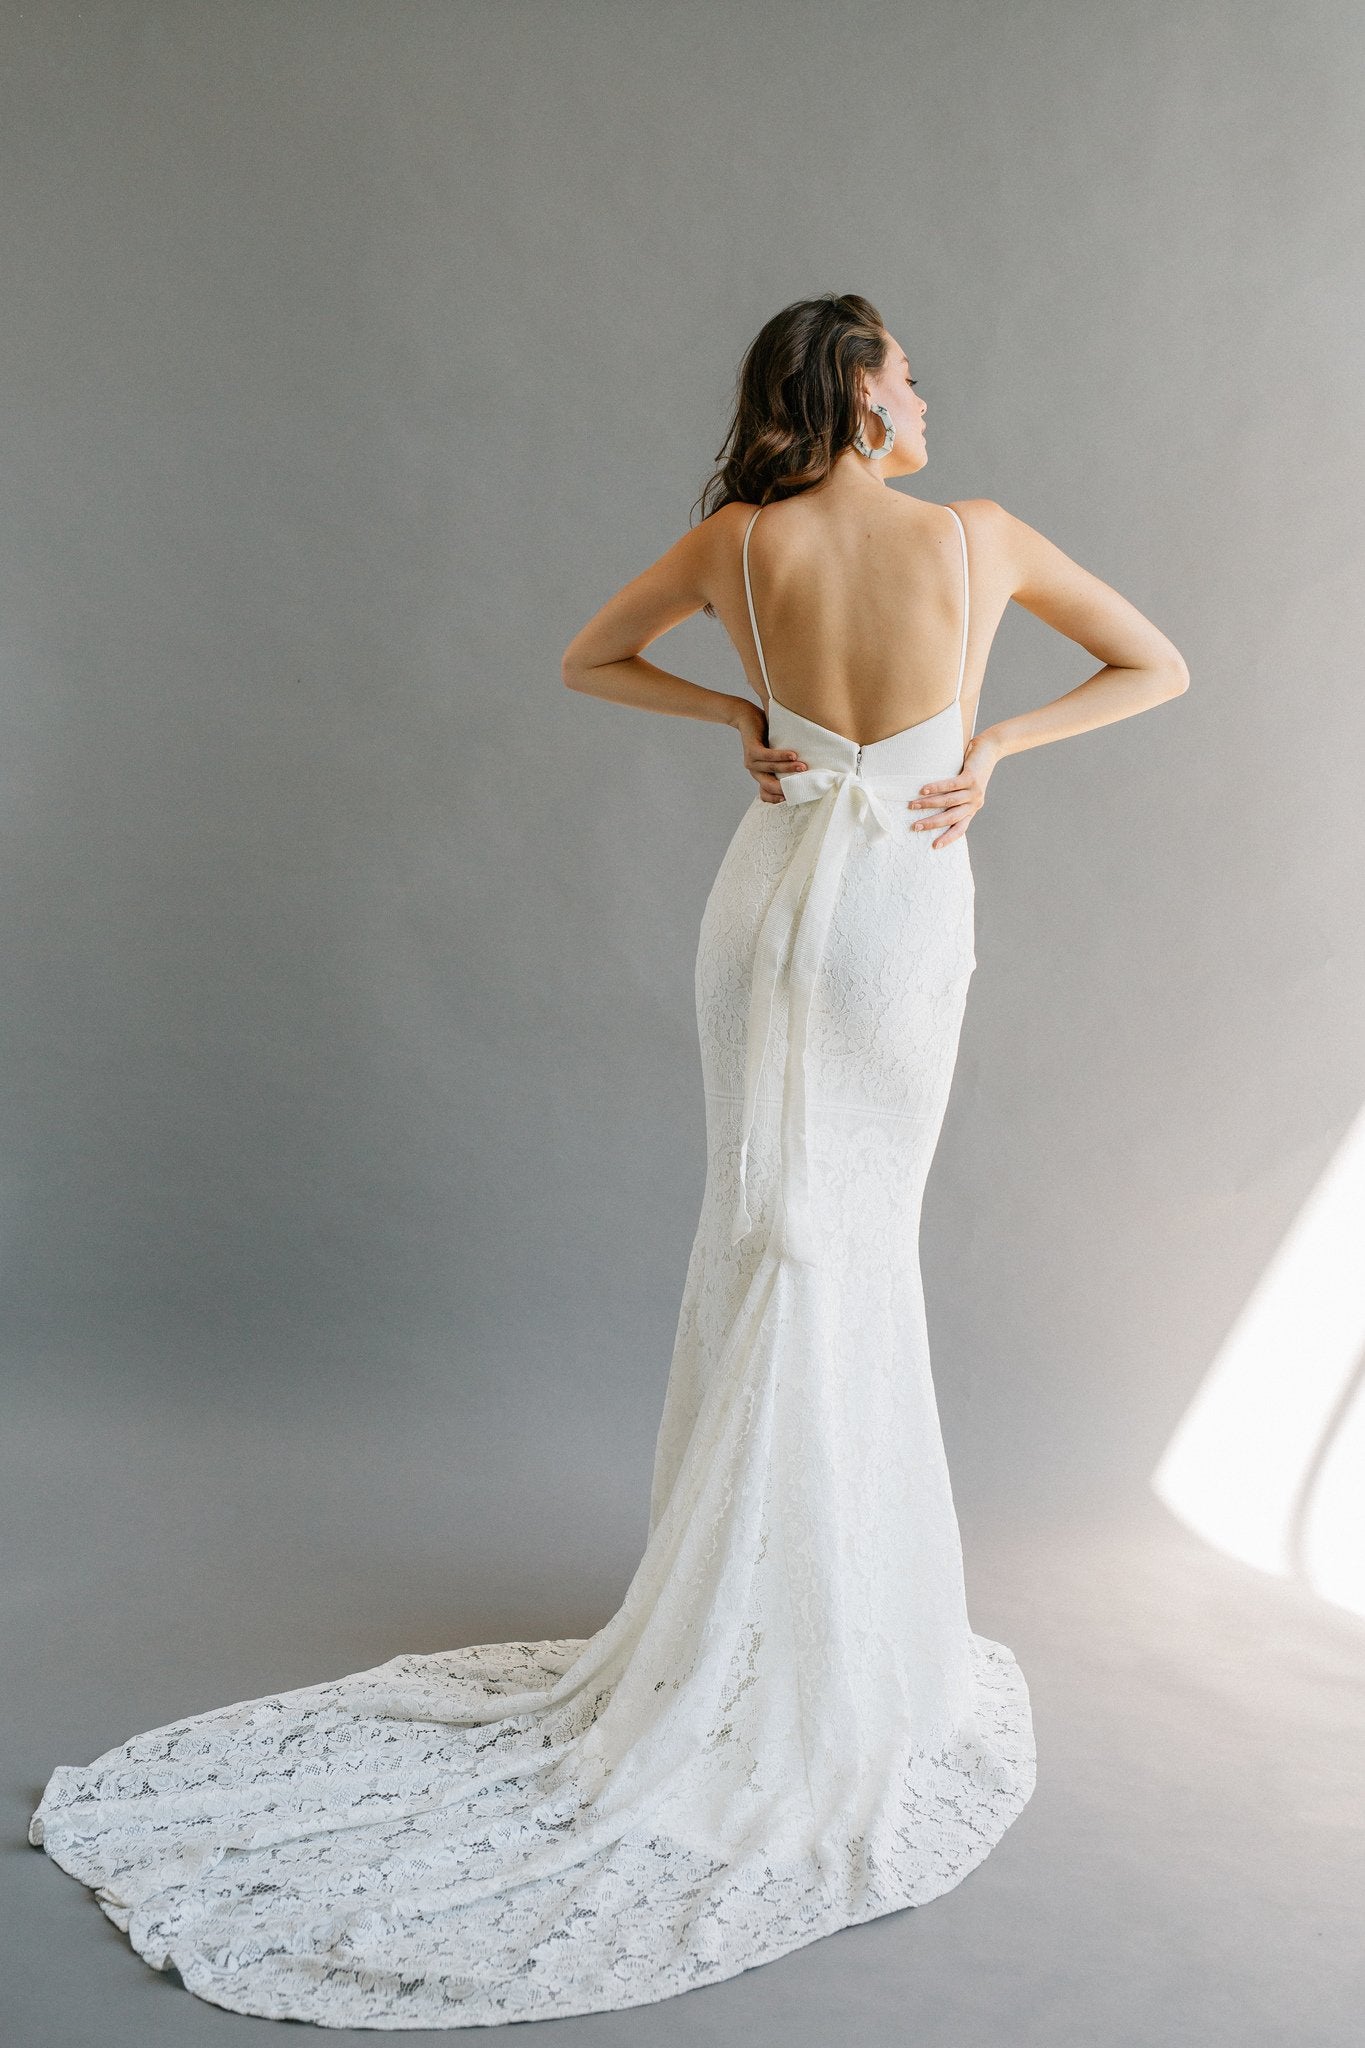 A high neck wedding dress with a low back, built-in bow, and a lace mermaid skirt with a hidden slit